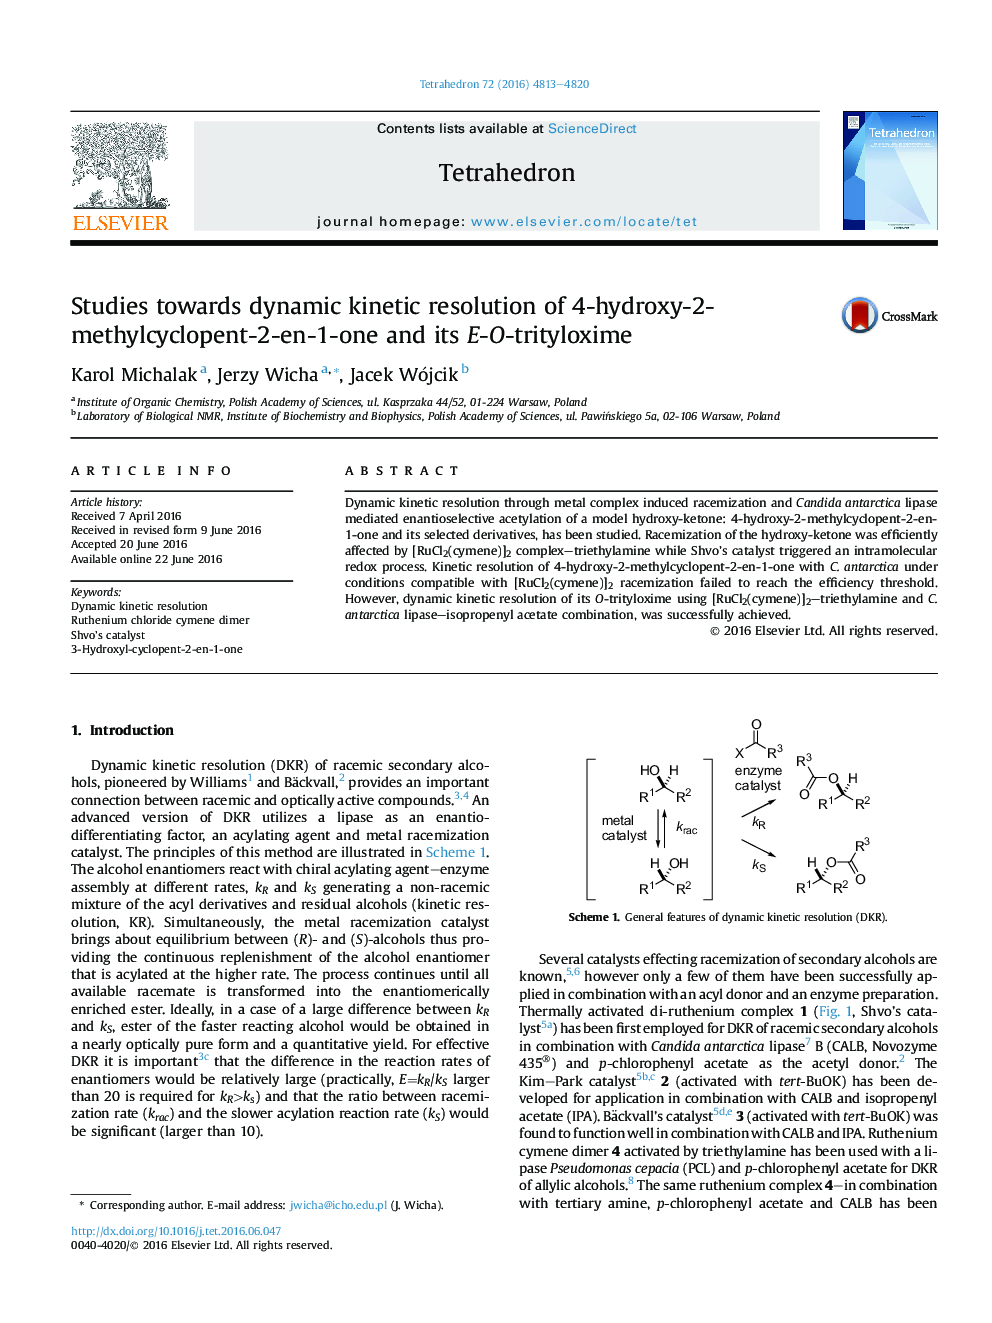 Studies towards dynamic kinetic resolution of 4-hydroxy-2-methylcyclopent-2-en-1-one and its E-O-trityloxime